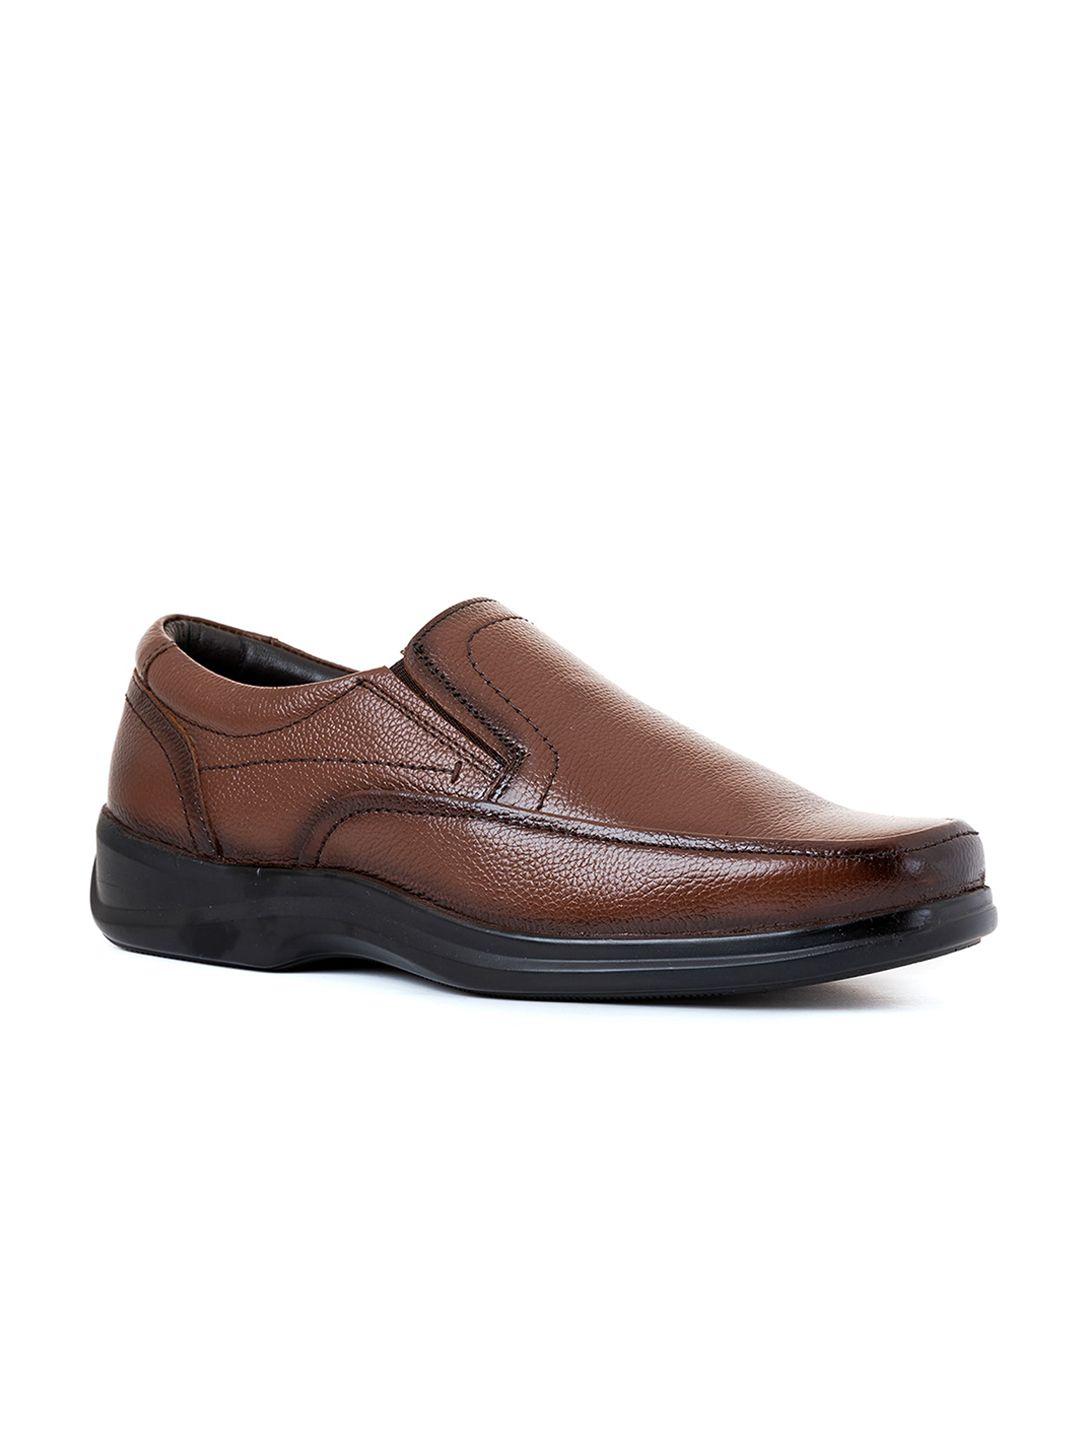 khadims-men-brown-textured-leather-formal-shoes